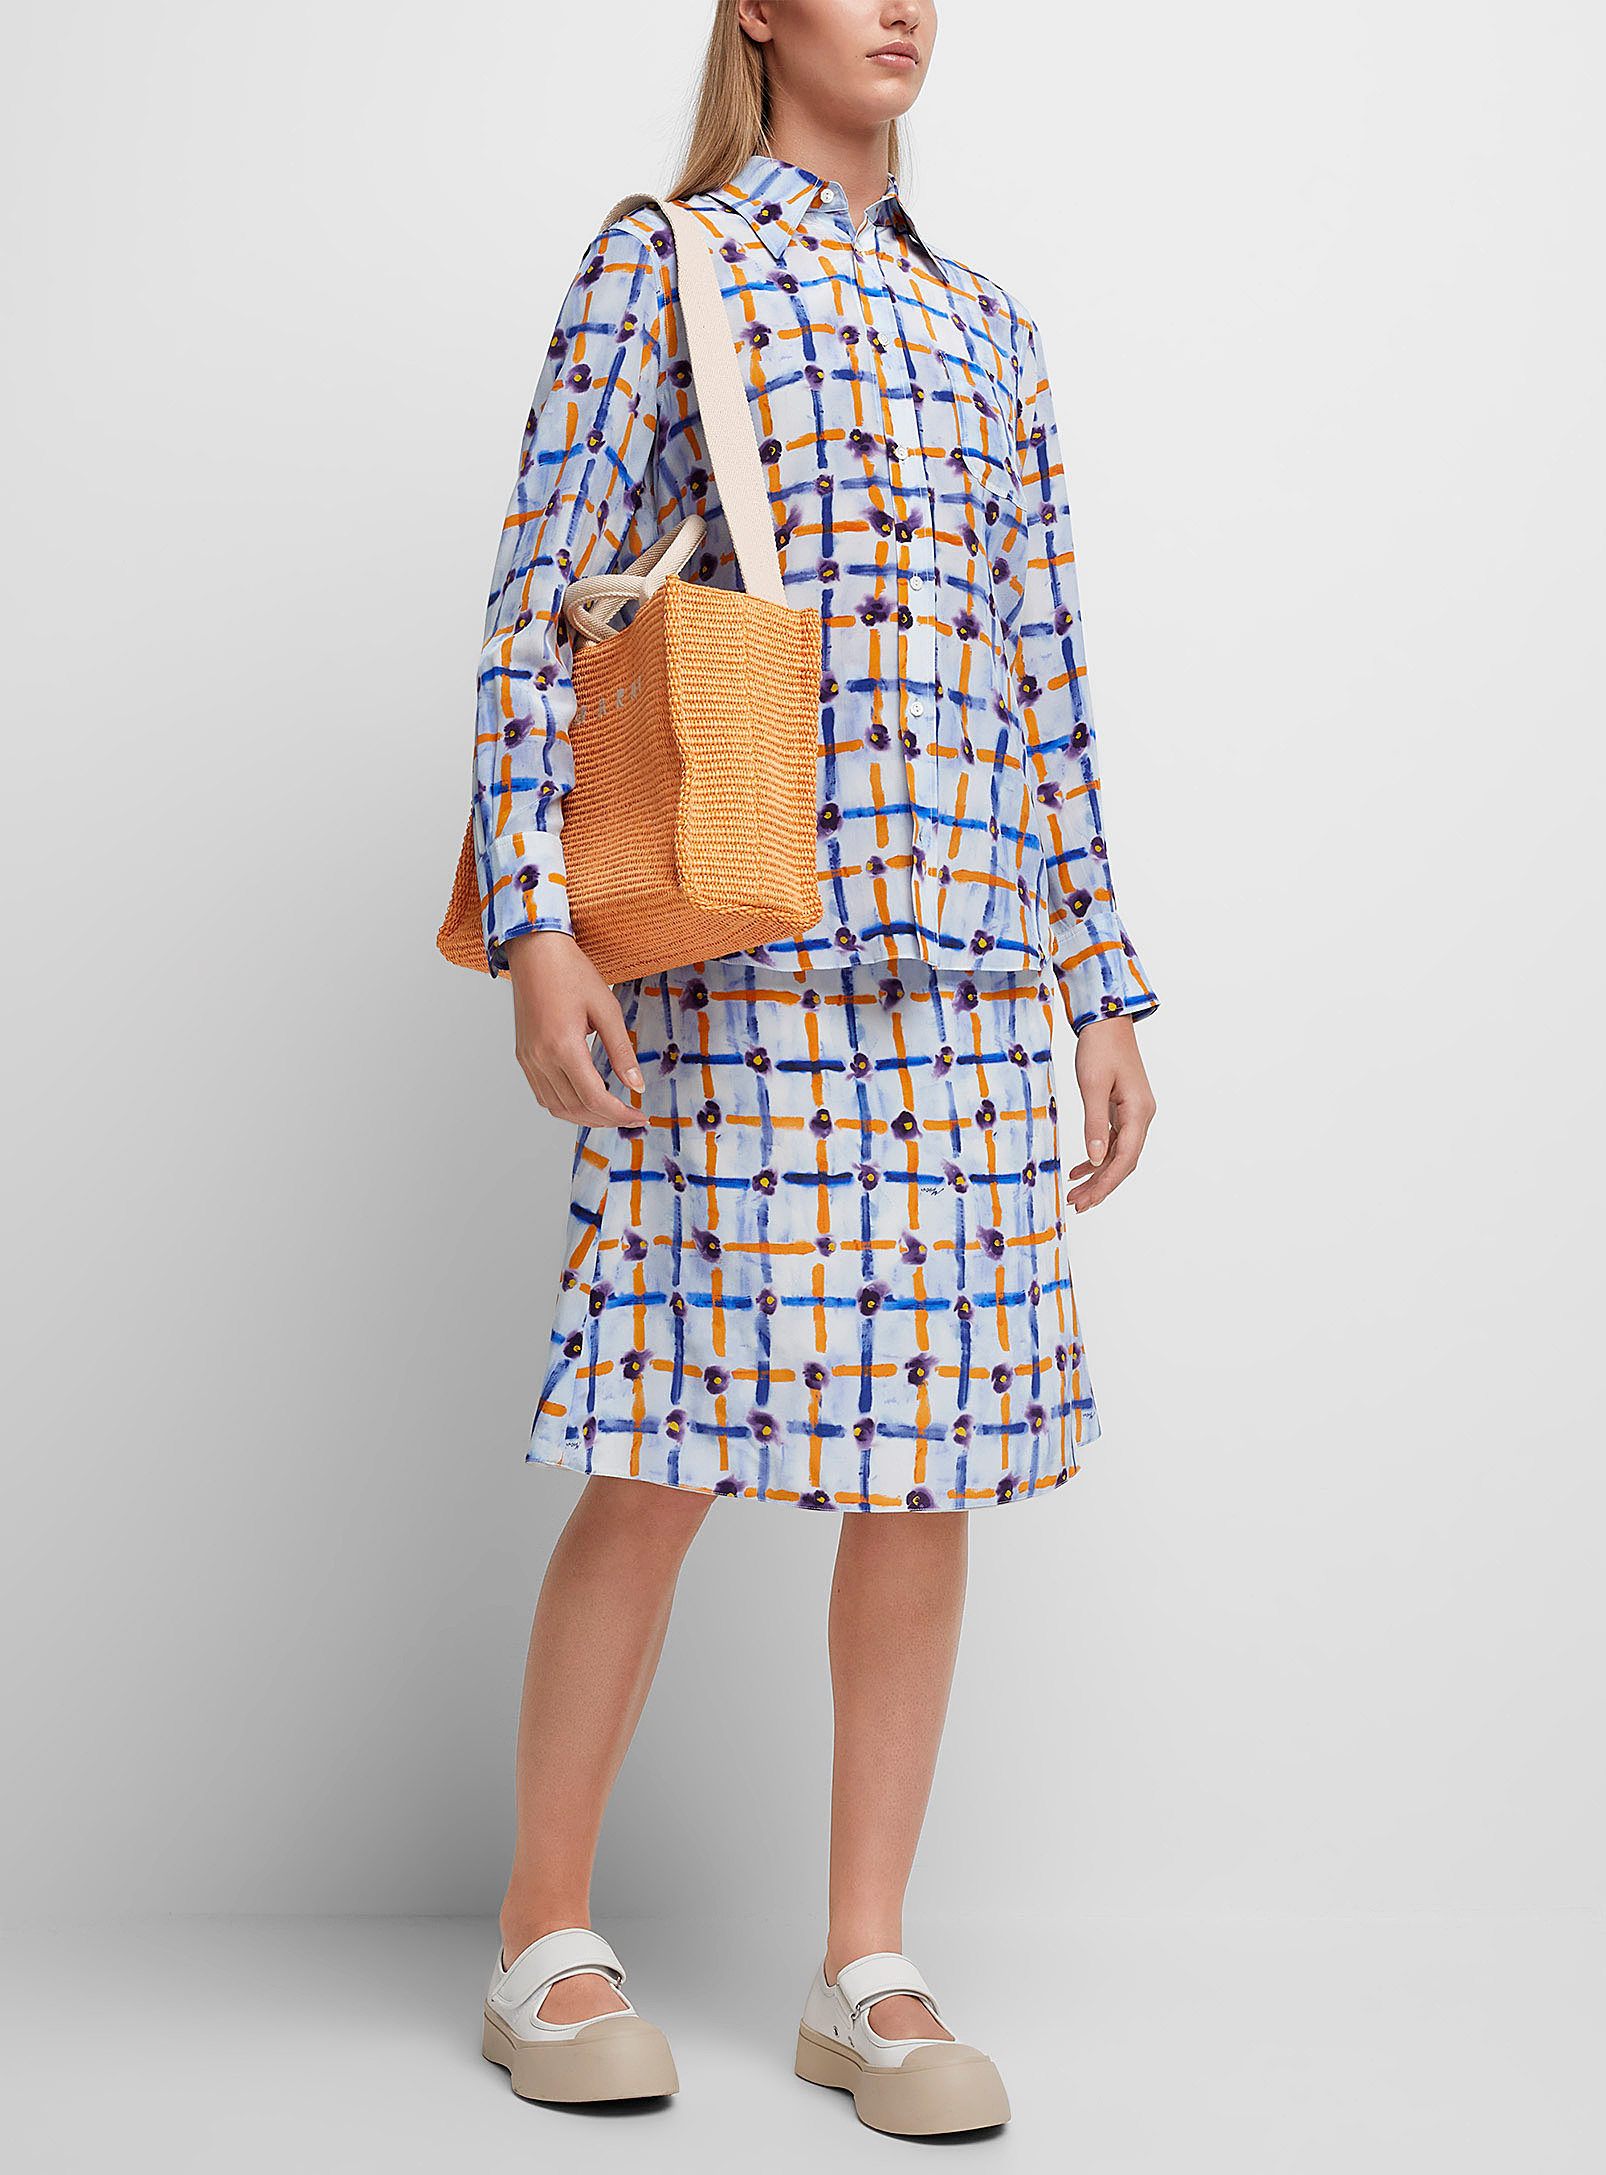 Marni Floral Checkers Pure Silk Skirt In Patterned Blue